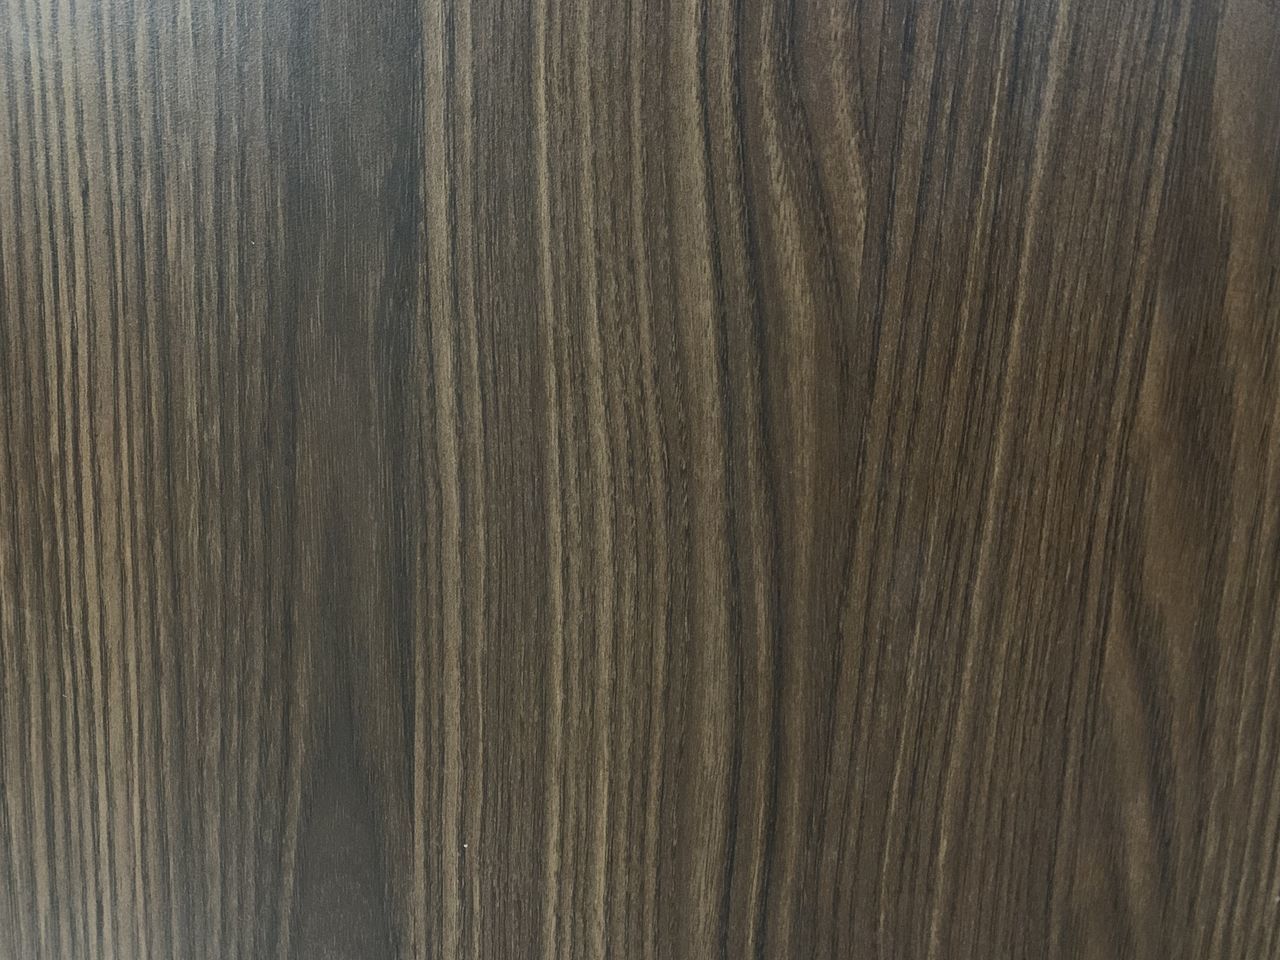 backgrounds, textured, pattern, wood, wood grain, full frame, wood flooring, laminate flooring, no people, floor, brown, hardwood, close-up, plank, flooring, material, striped, timber, tree, wood stain, abstract, rough, copy space, indoors, wood paneling, nature, textured effect, plywood, dark, hardwood floor, smooth, macro, extreme close-up, industry, surface level